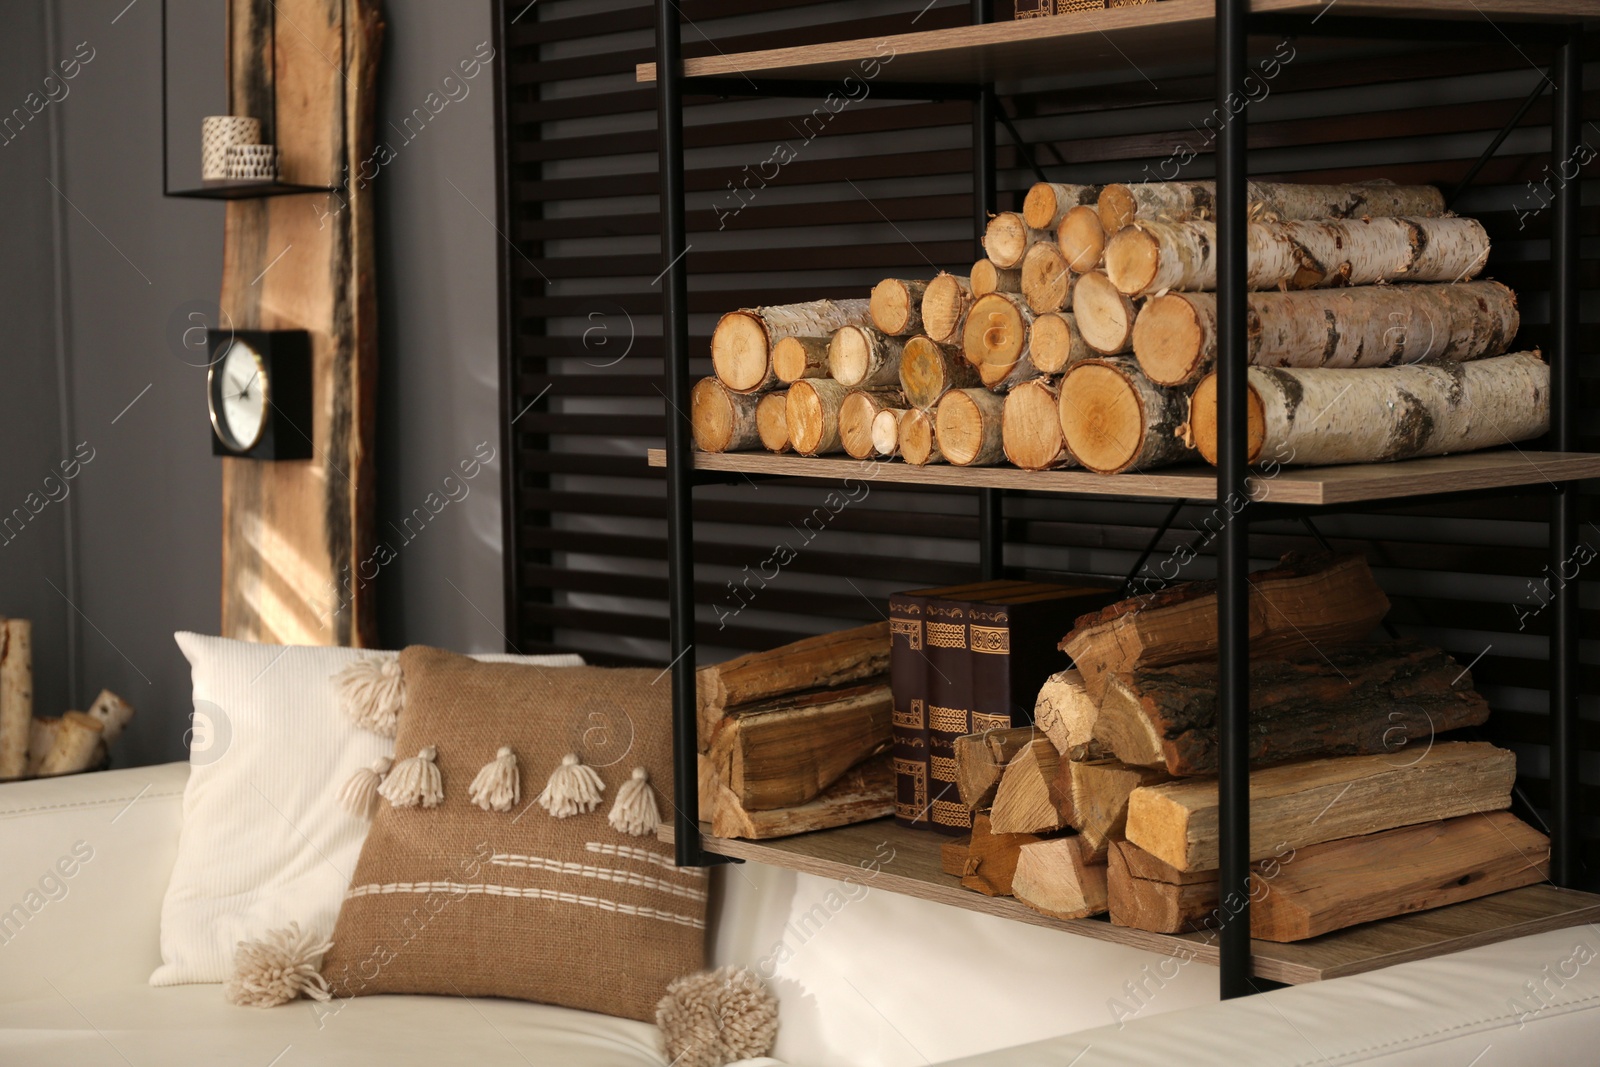 Photo of Shelving unit with stacked firewood and books near wall in room. Idea for interior design